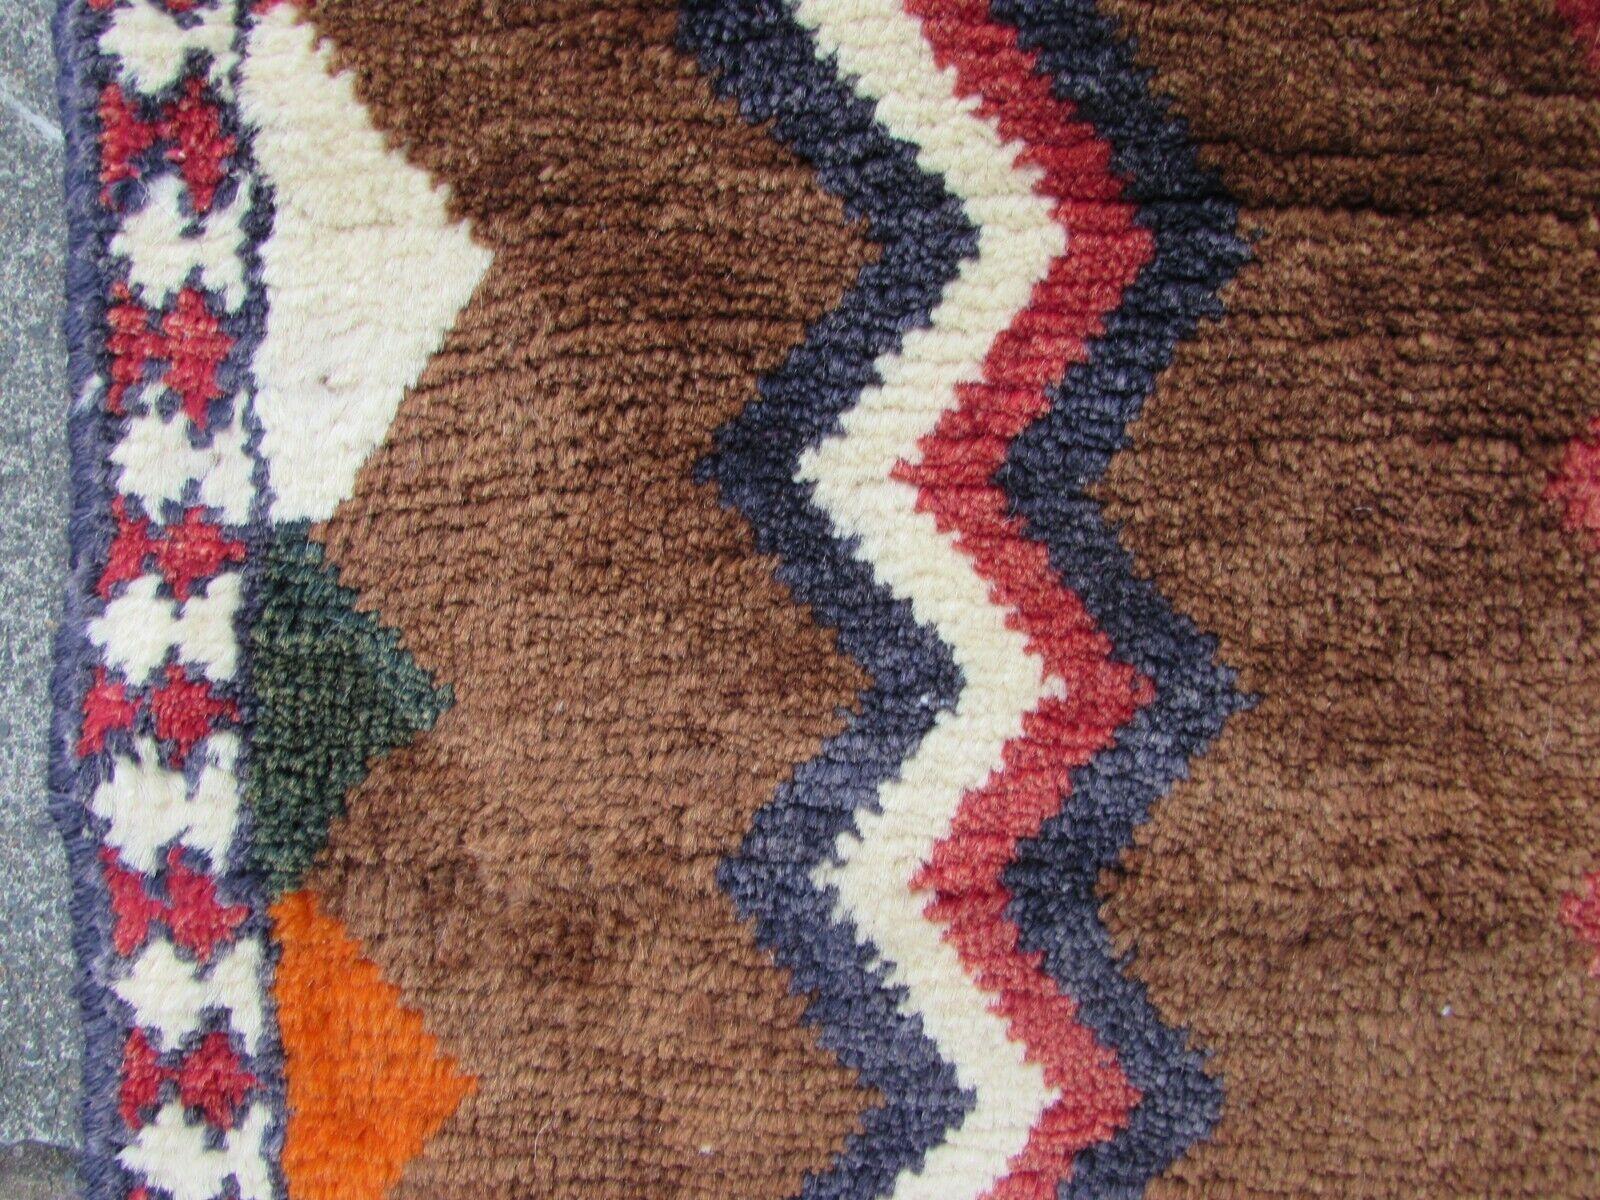 Hand-Knotted Handmade Vintage Persian Style Gabbeh Rug 3.1' x 4.5', 1970s - 1Q70 For Sale